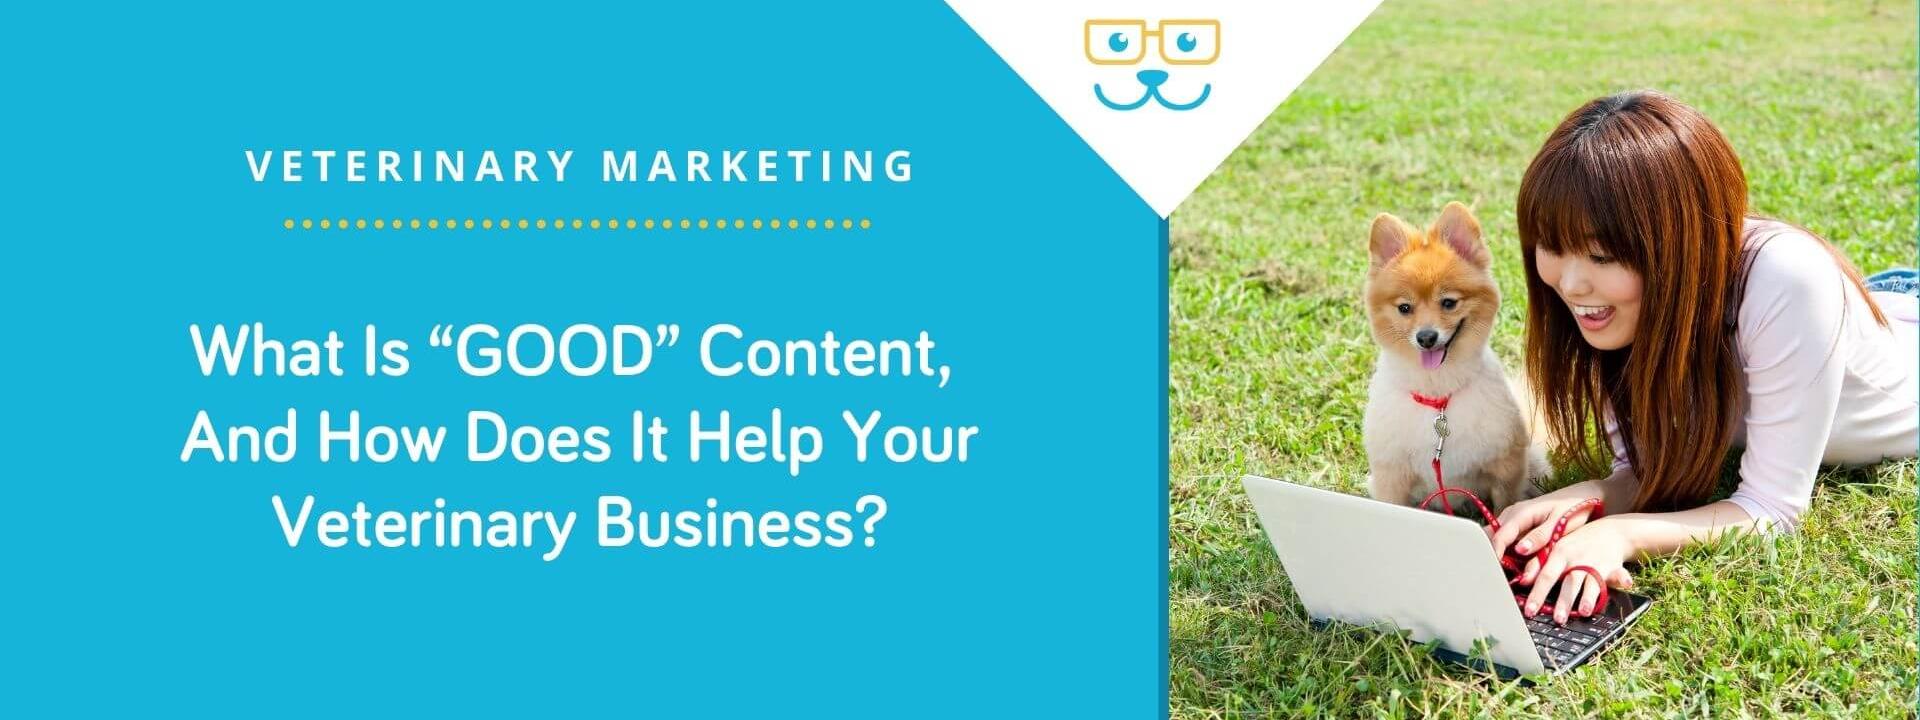 What Is “GOOD” Content, And How Does It Help Your Veterinary Business?